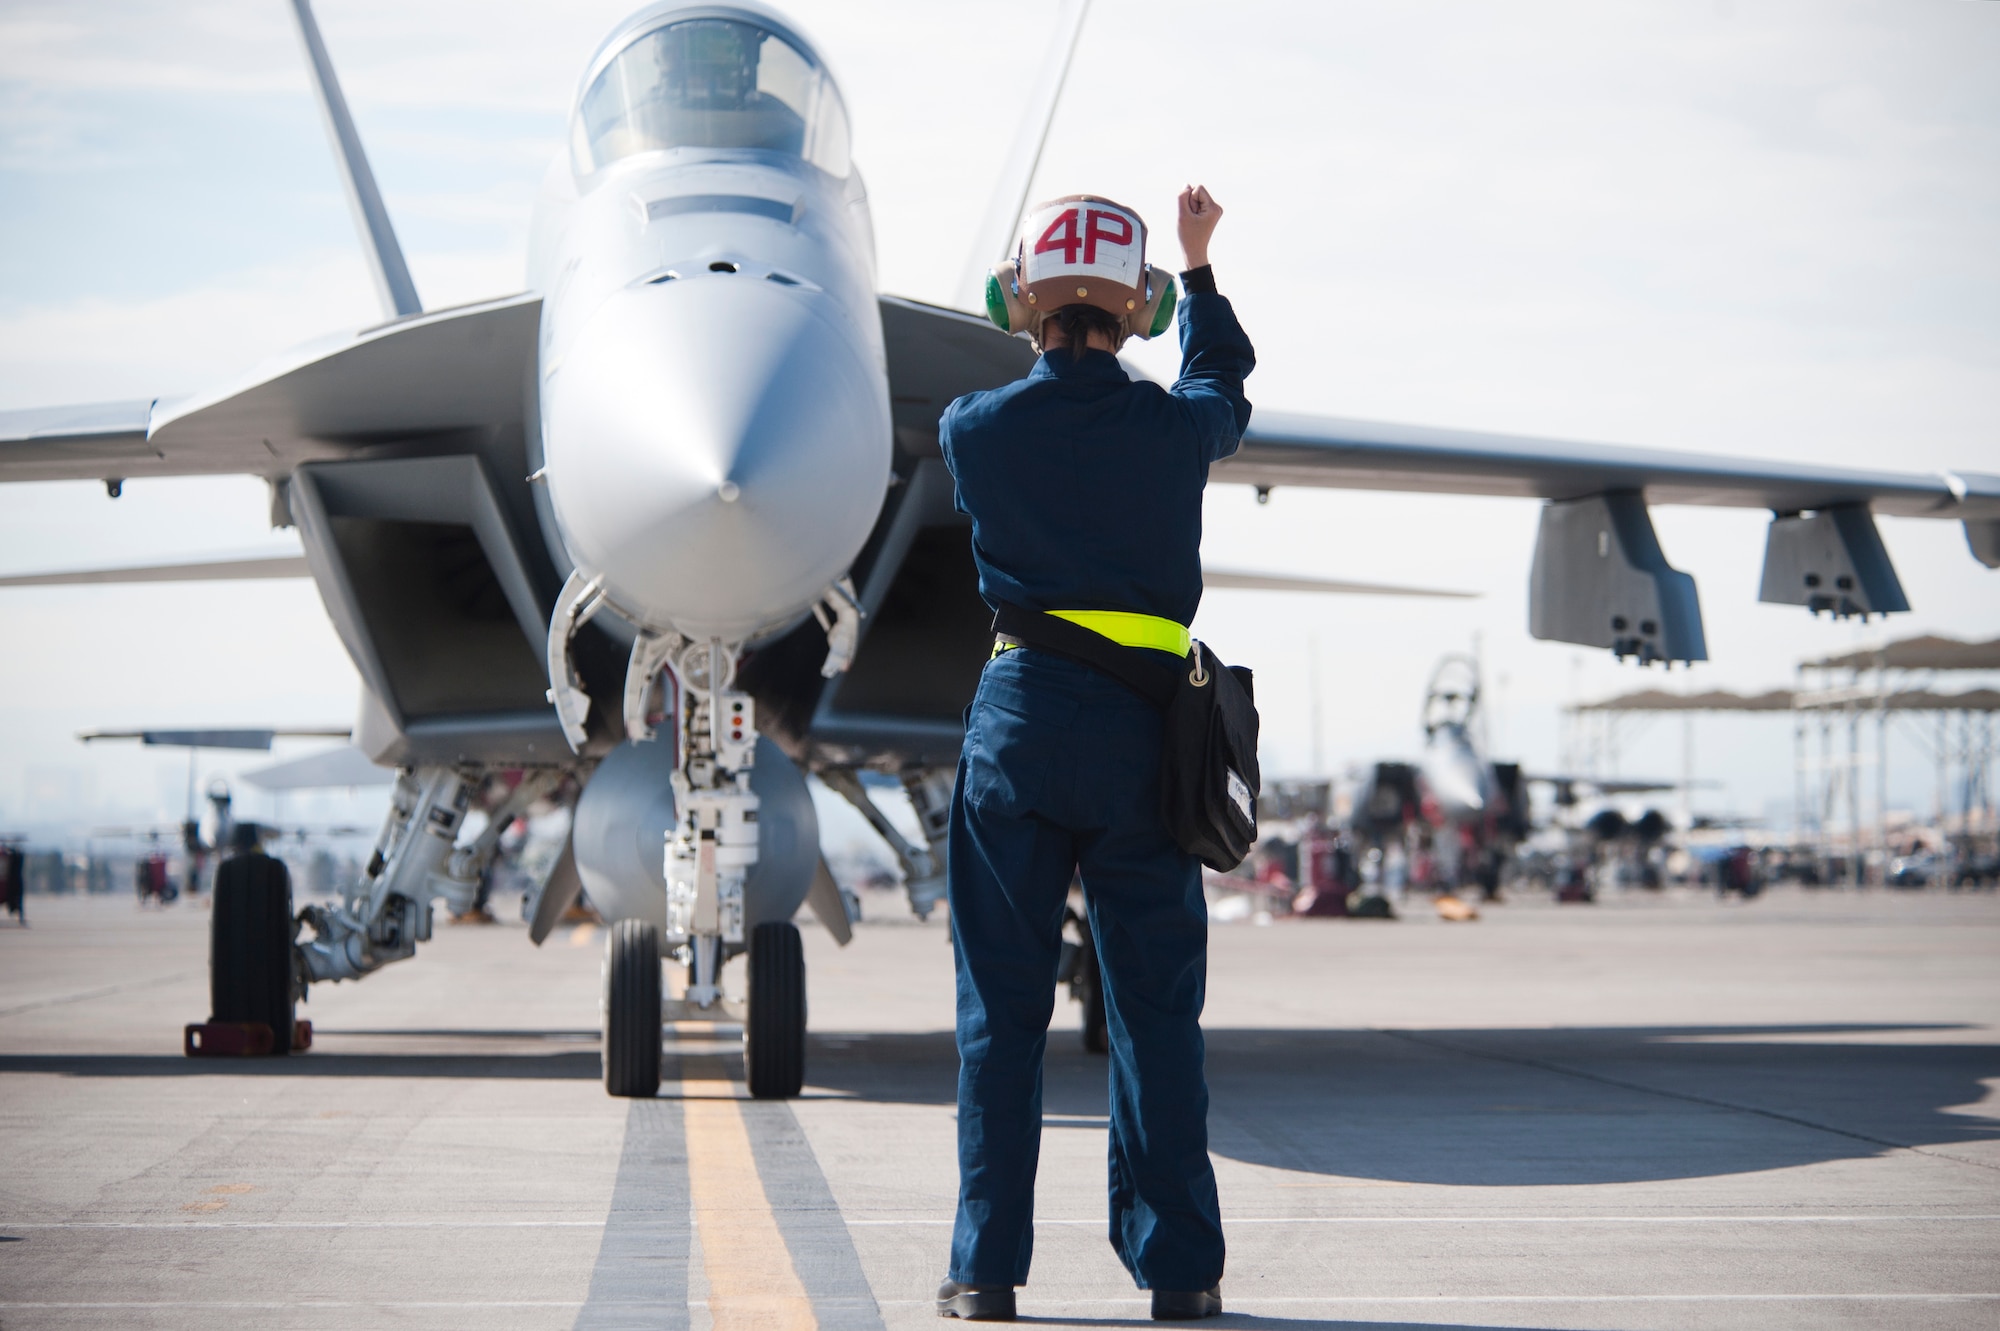 U.S. Navy Airman Zhou Chen, Strike Fighter Squadron 25 (VFA-25), Naval Air Station, Lemoore, Calif., plane captain, signals to an F/A18E Hornet pilot to hold prior to performing a pre-flight vertical rudder check on the Nellis Air Force Base, Nev. flight line Jan. 25, 2013. The VFA-25 is participating in Red Flag 13-2. Red Flag is a realistic combat training exercise involving joint and allied air forces. (U.S. Air Force photo by Lawrence Crespo)